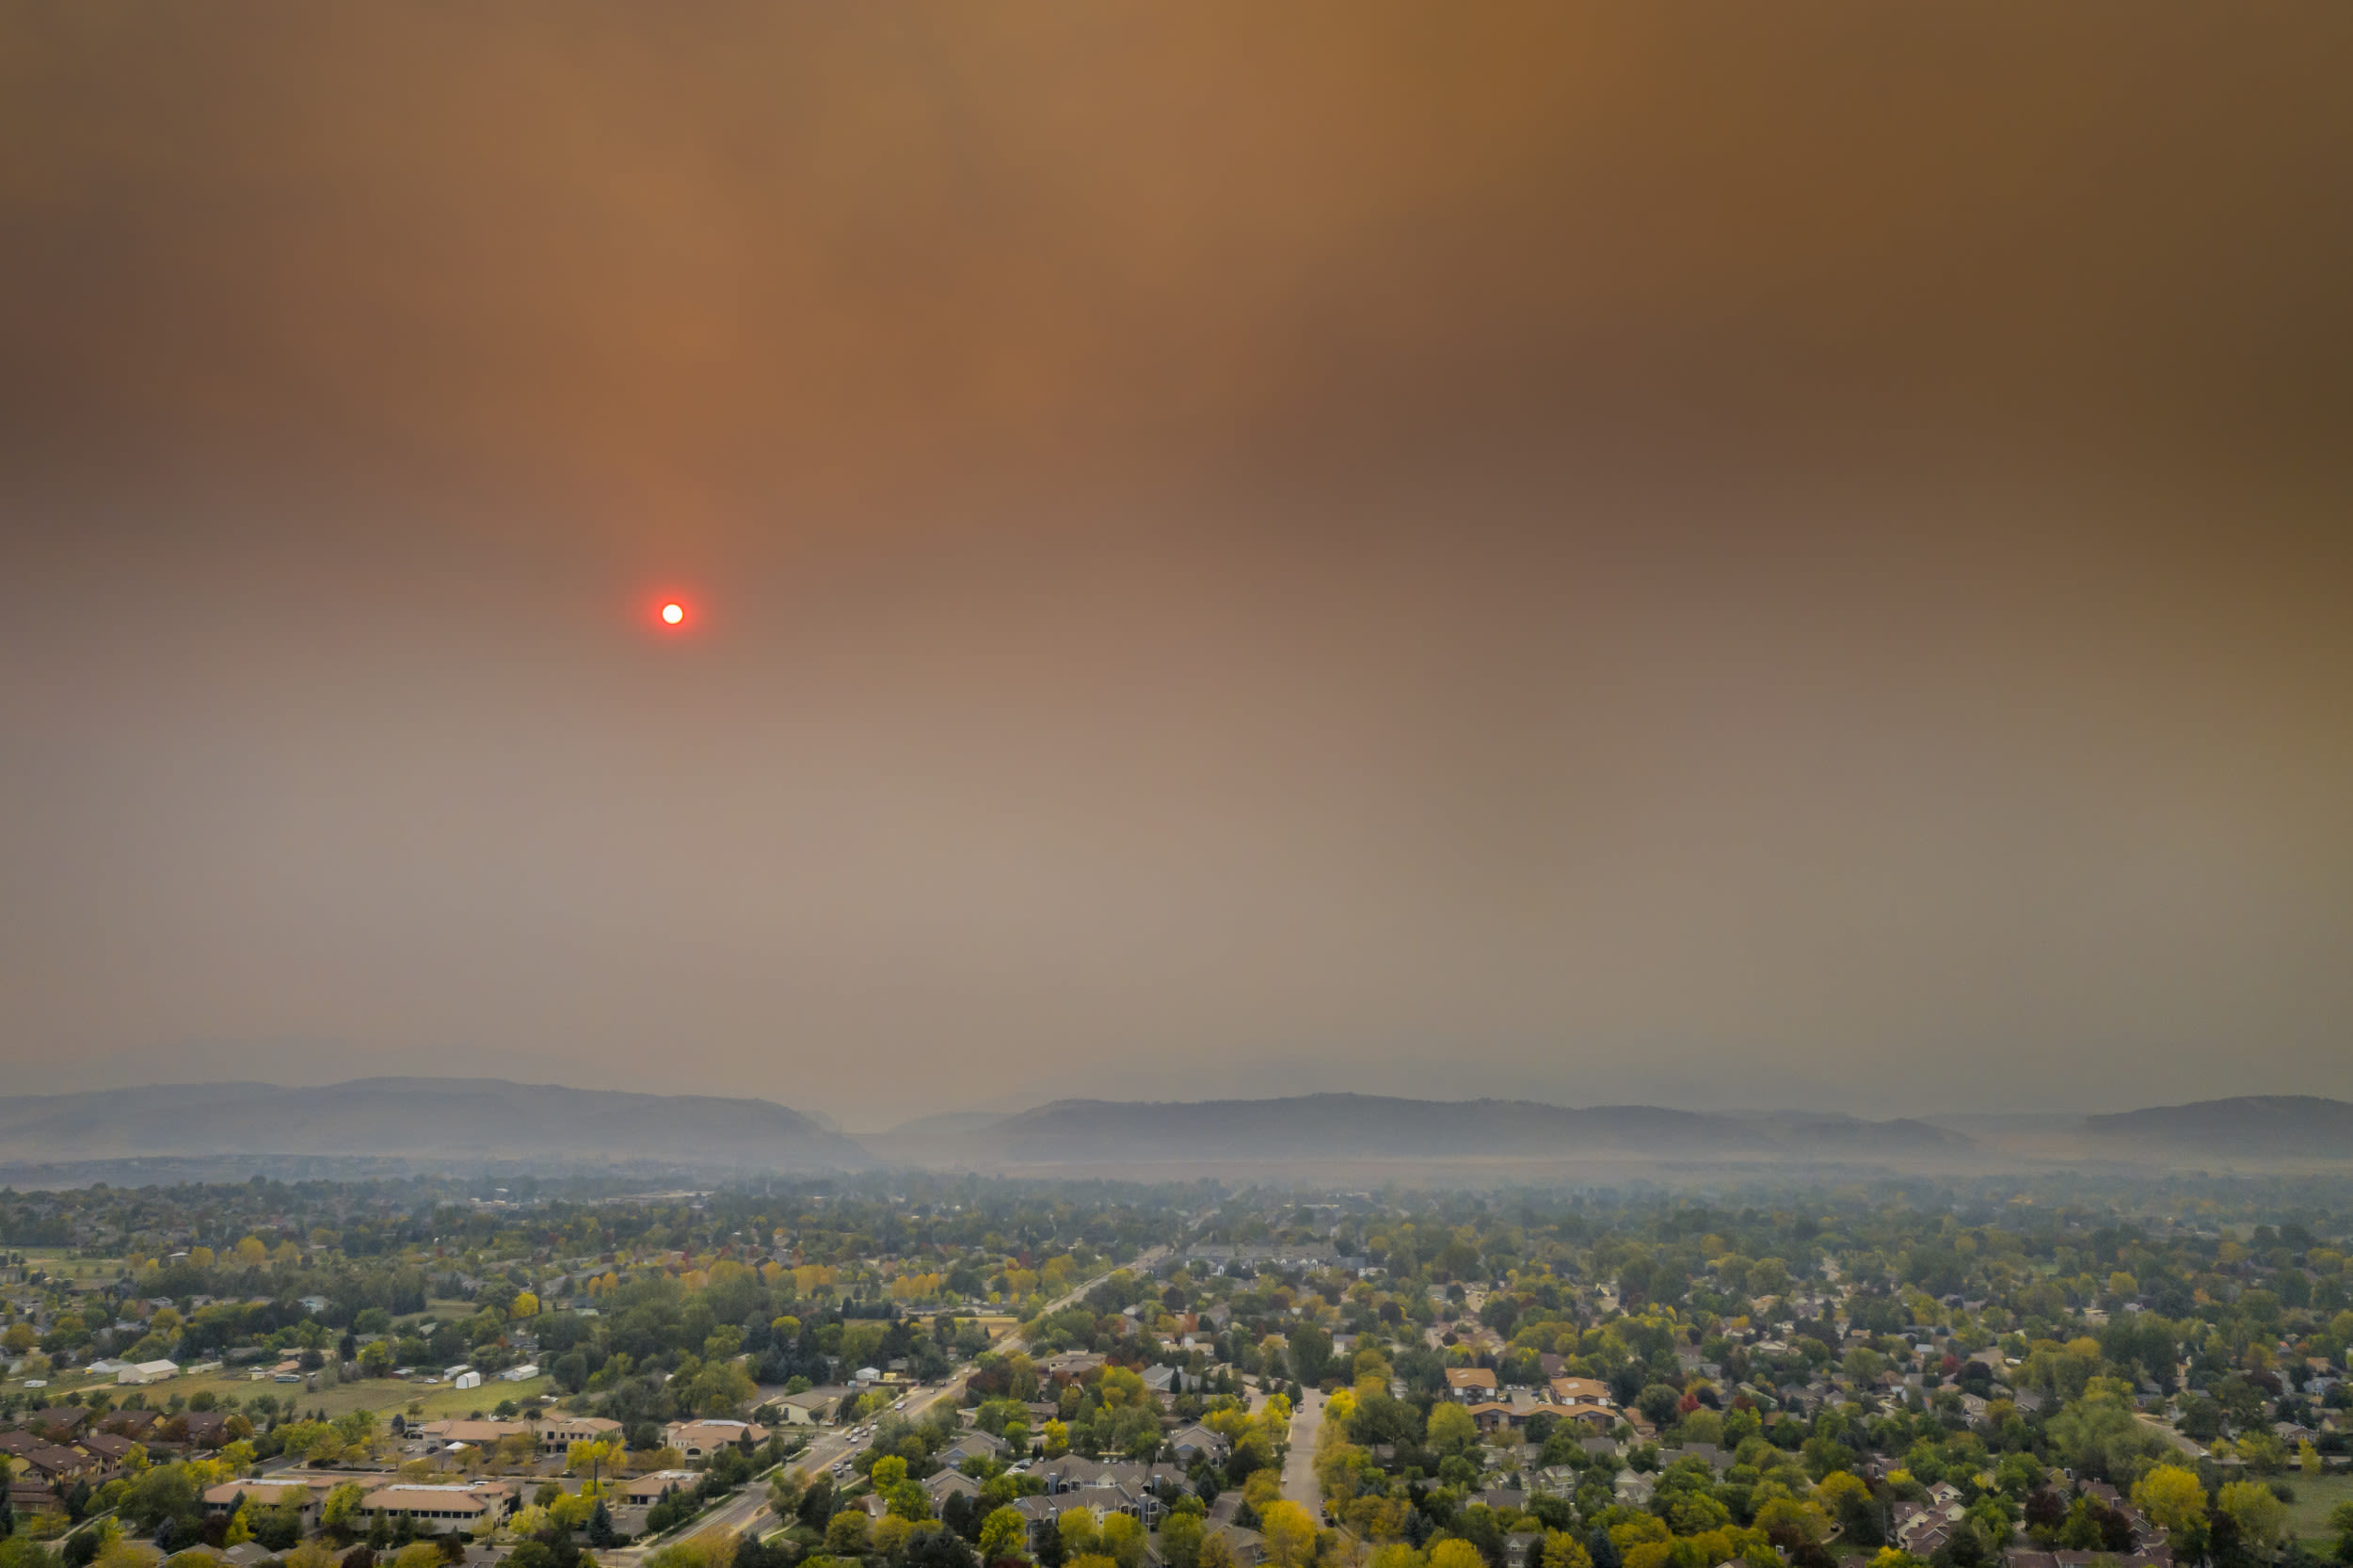 Alexander wildfire update: Colorado officials say to "evacuate immediately"